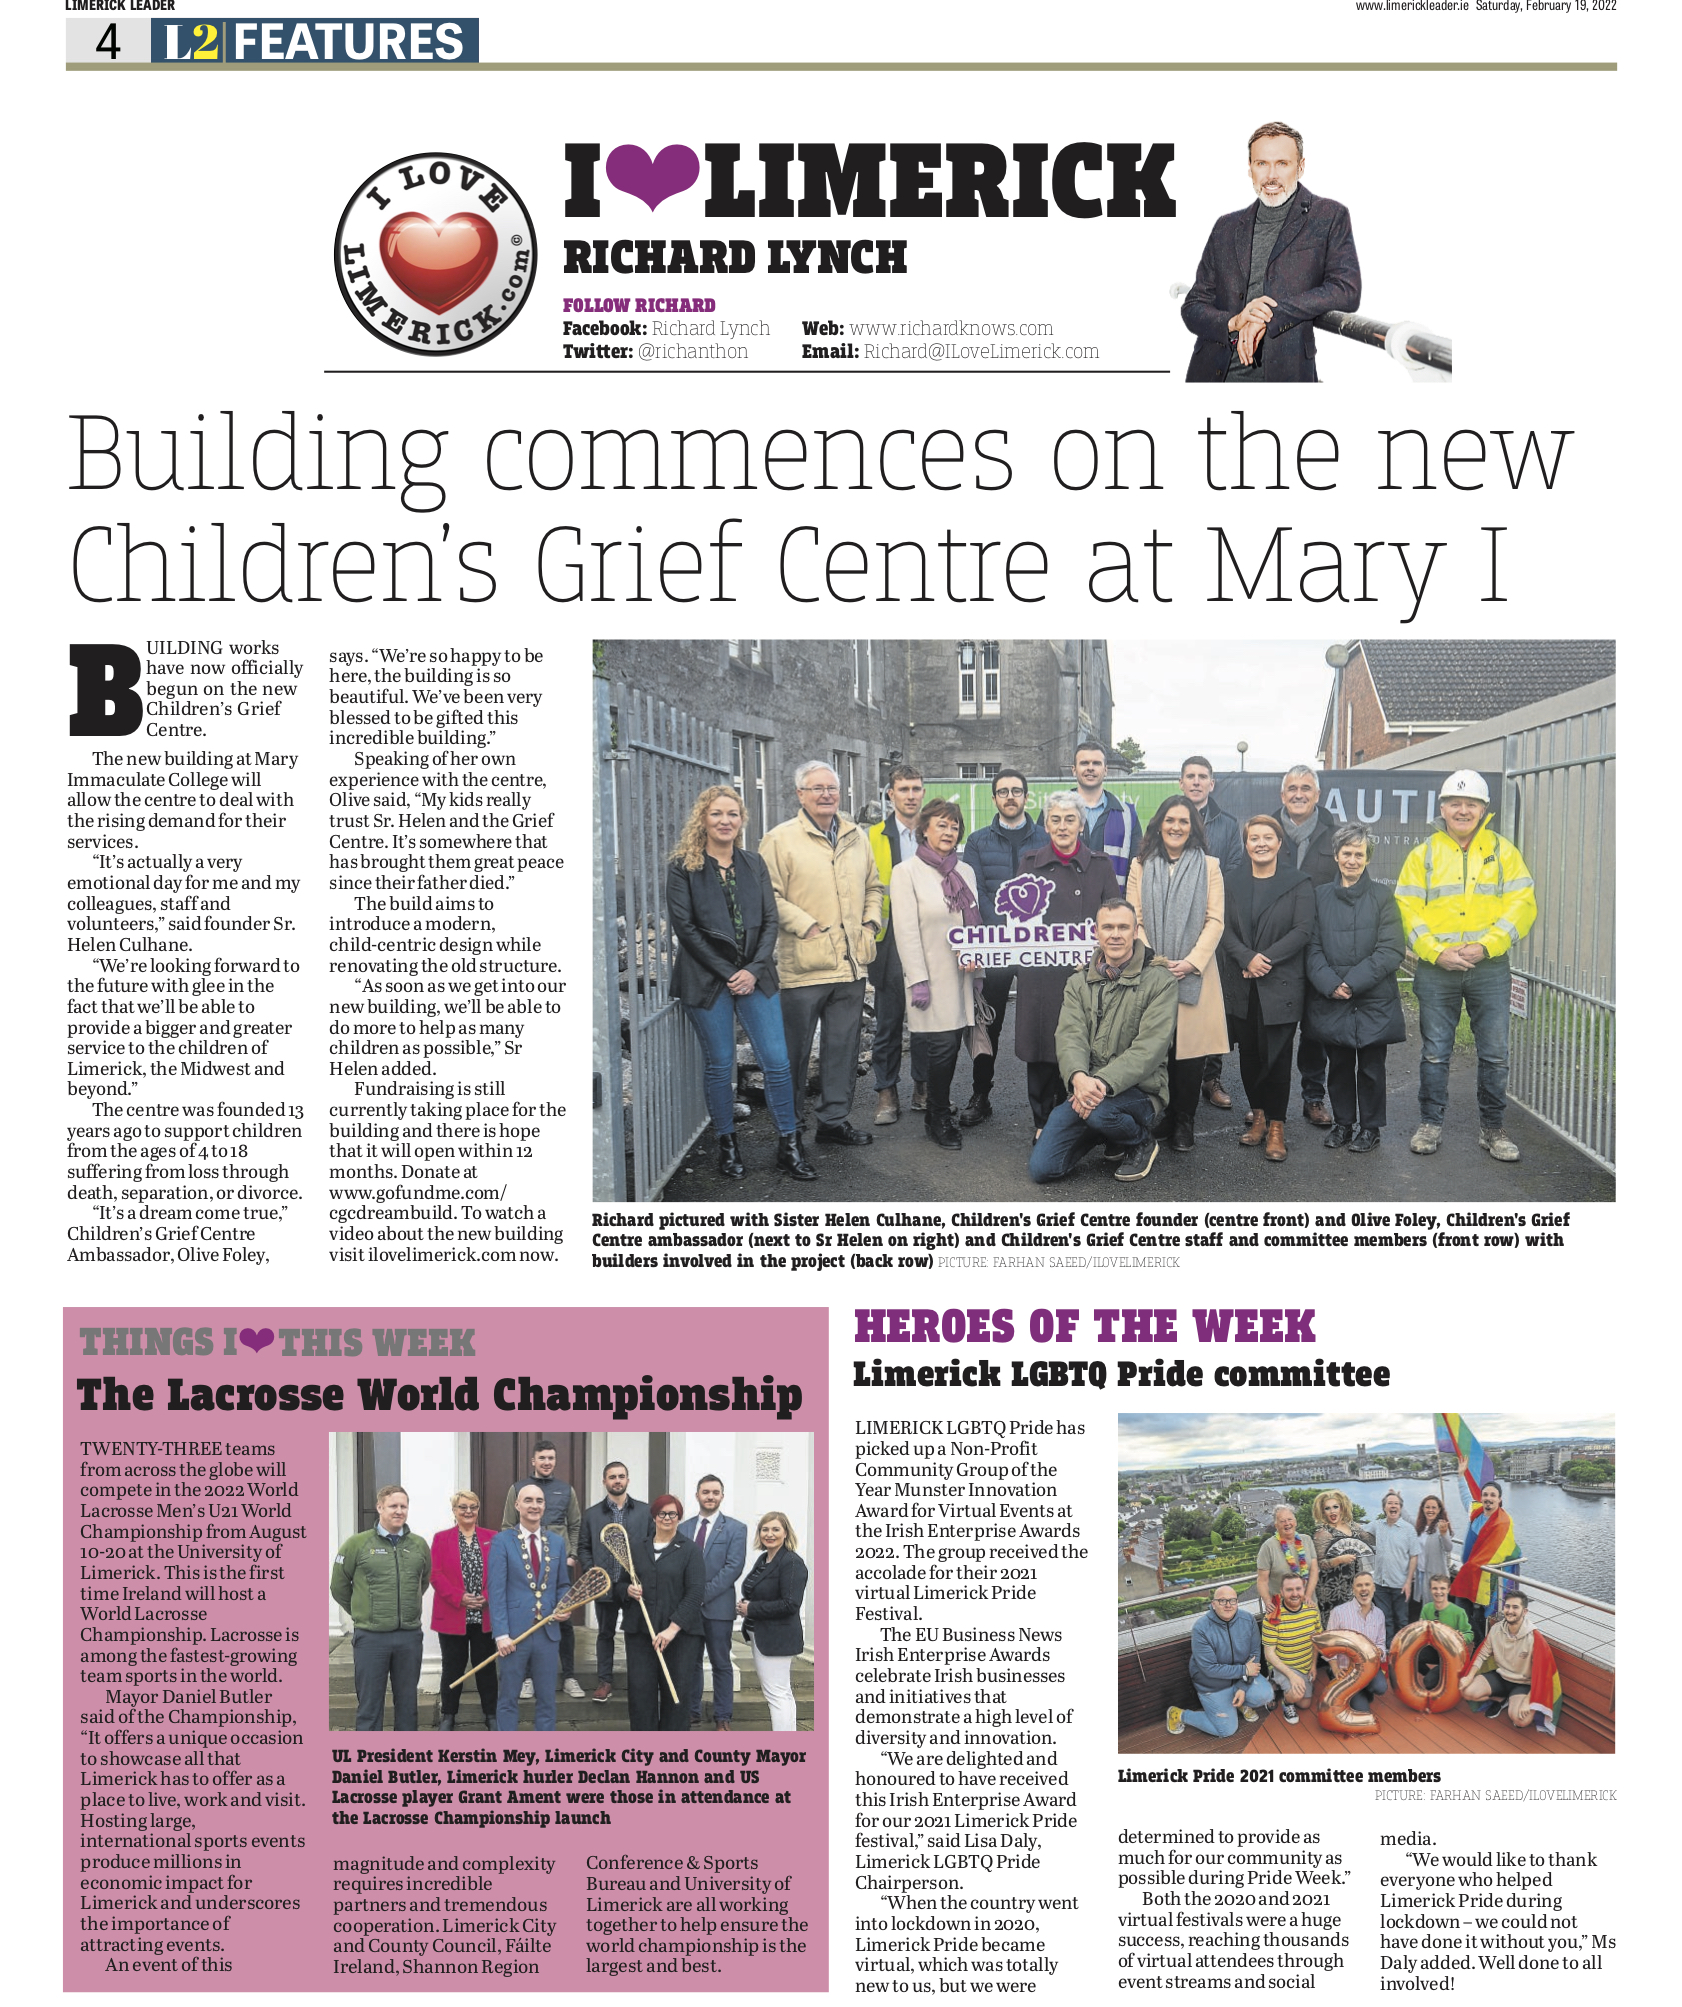 The Leader Column February 19 2022 - Building commences on the new Children's Grief Centre at Mary I